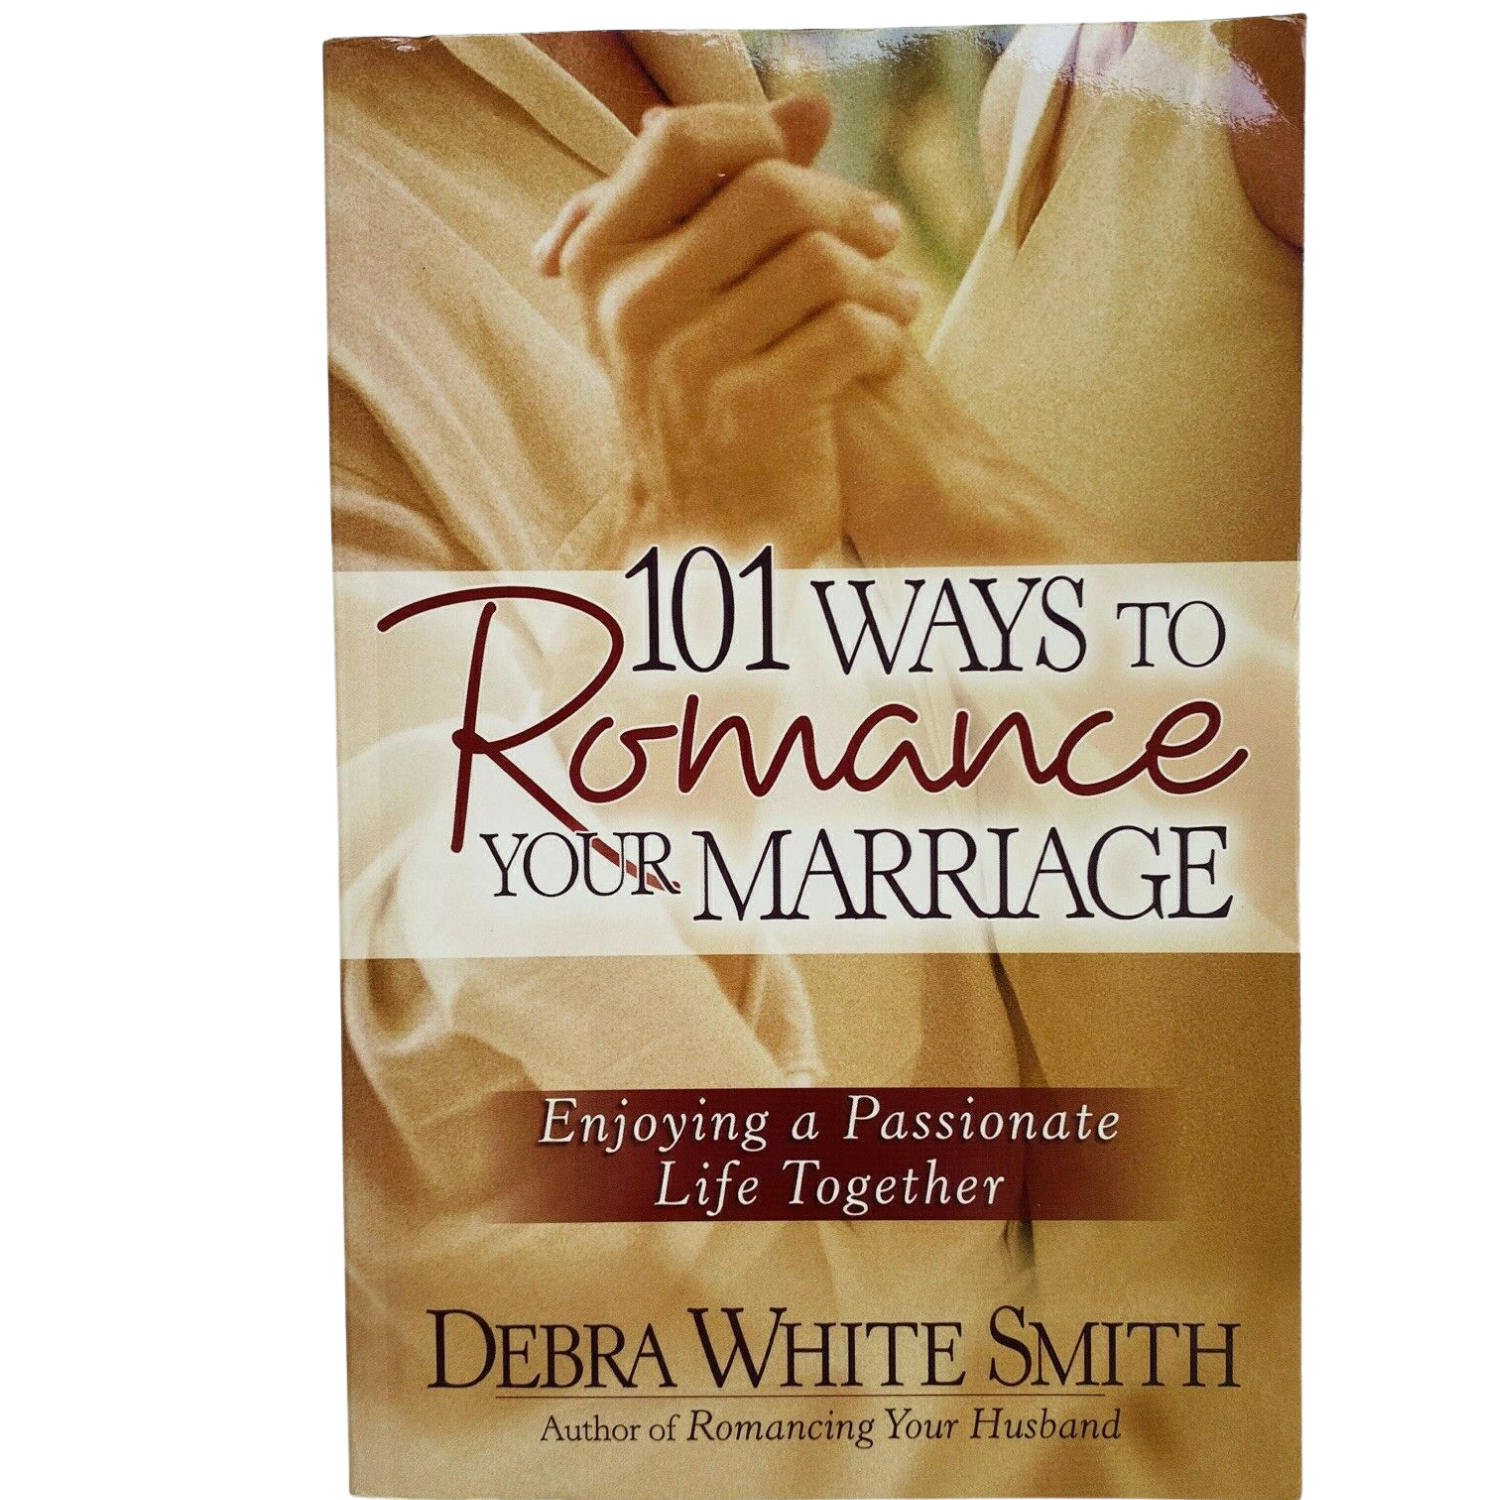 101 Ways to Romance Your Marriage : Enjoying a Passionate Life Together by Debra White Smith (2003, Trade Paperback)